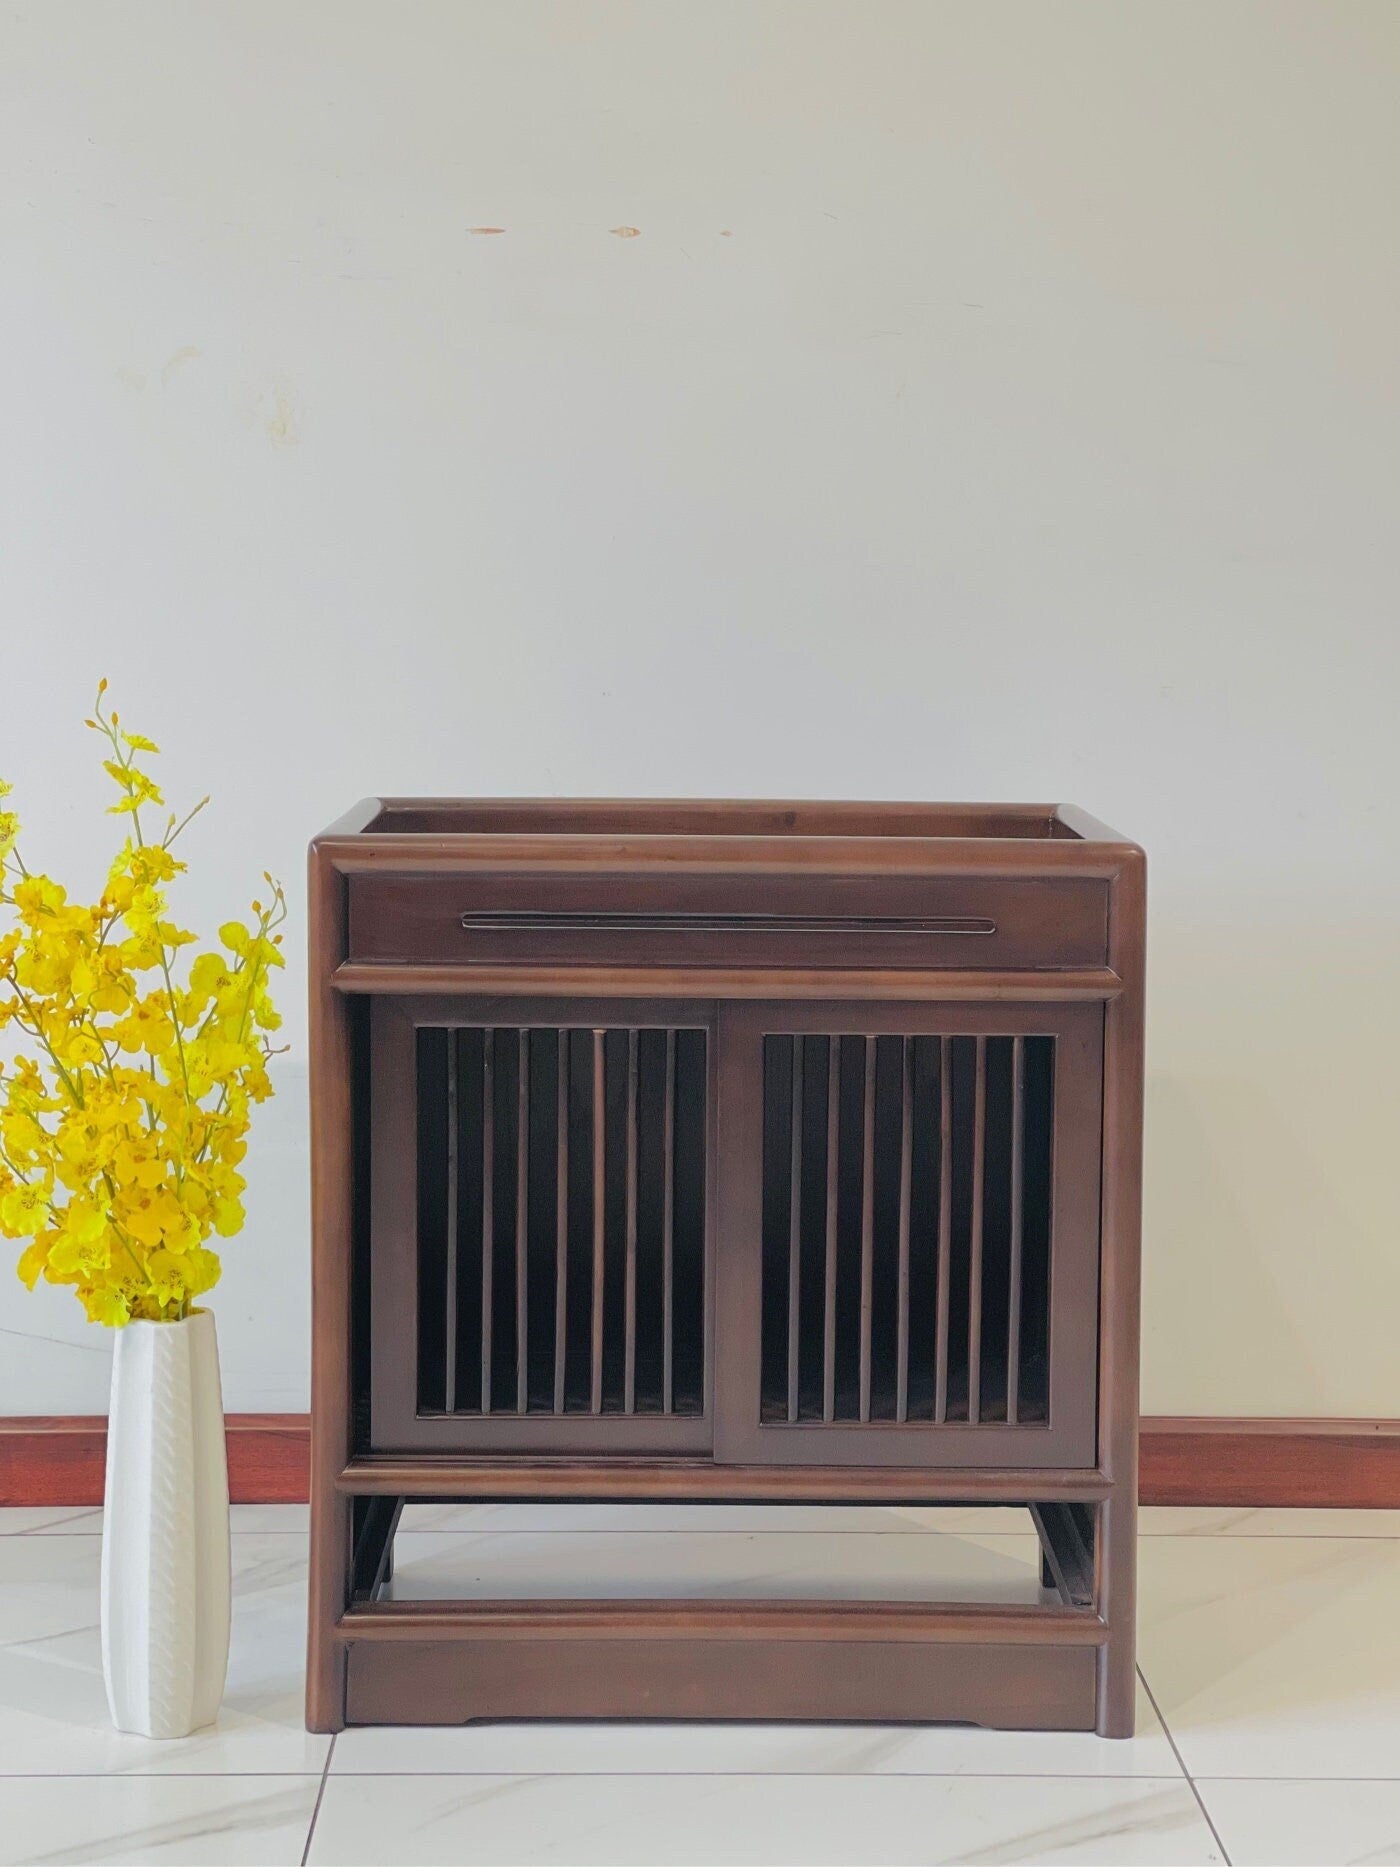 Record Storage Cabinet Early American, Record Storage, Record Player Display, Coastal Entry Table, Console Table, Farmhouse Console table - SlabstudioHongKong